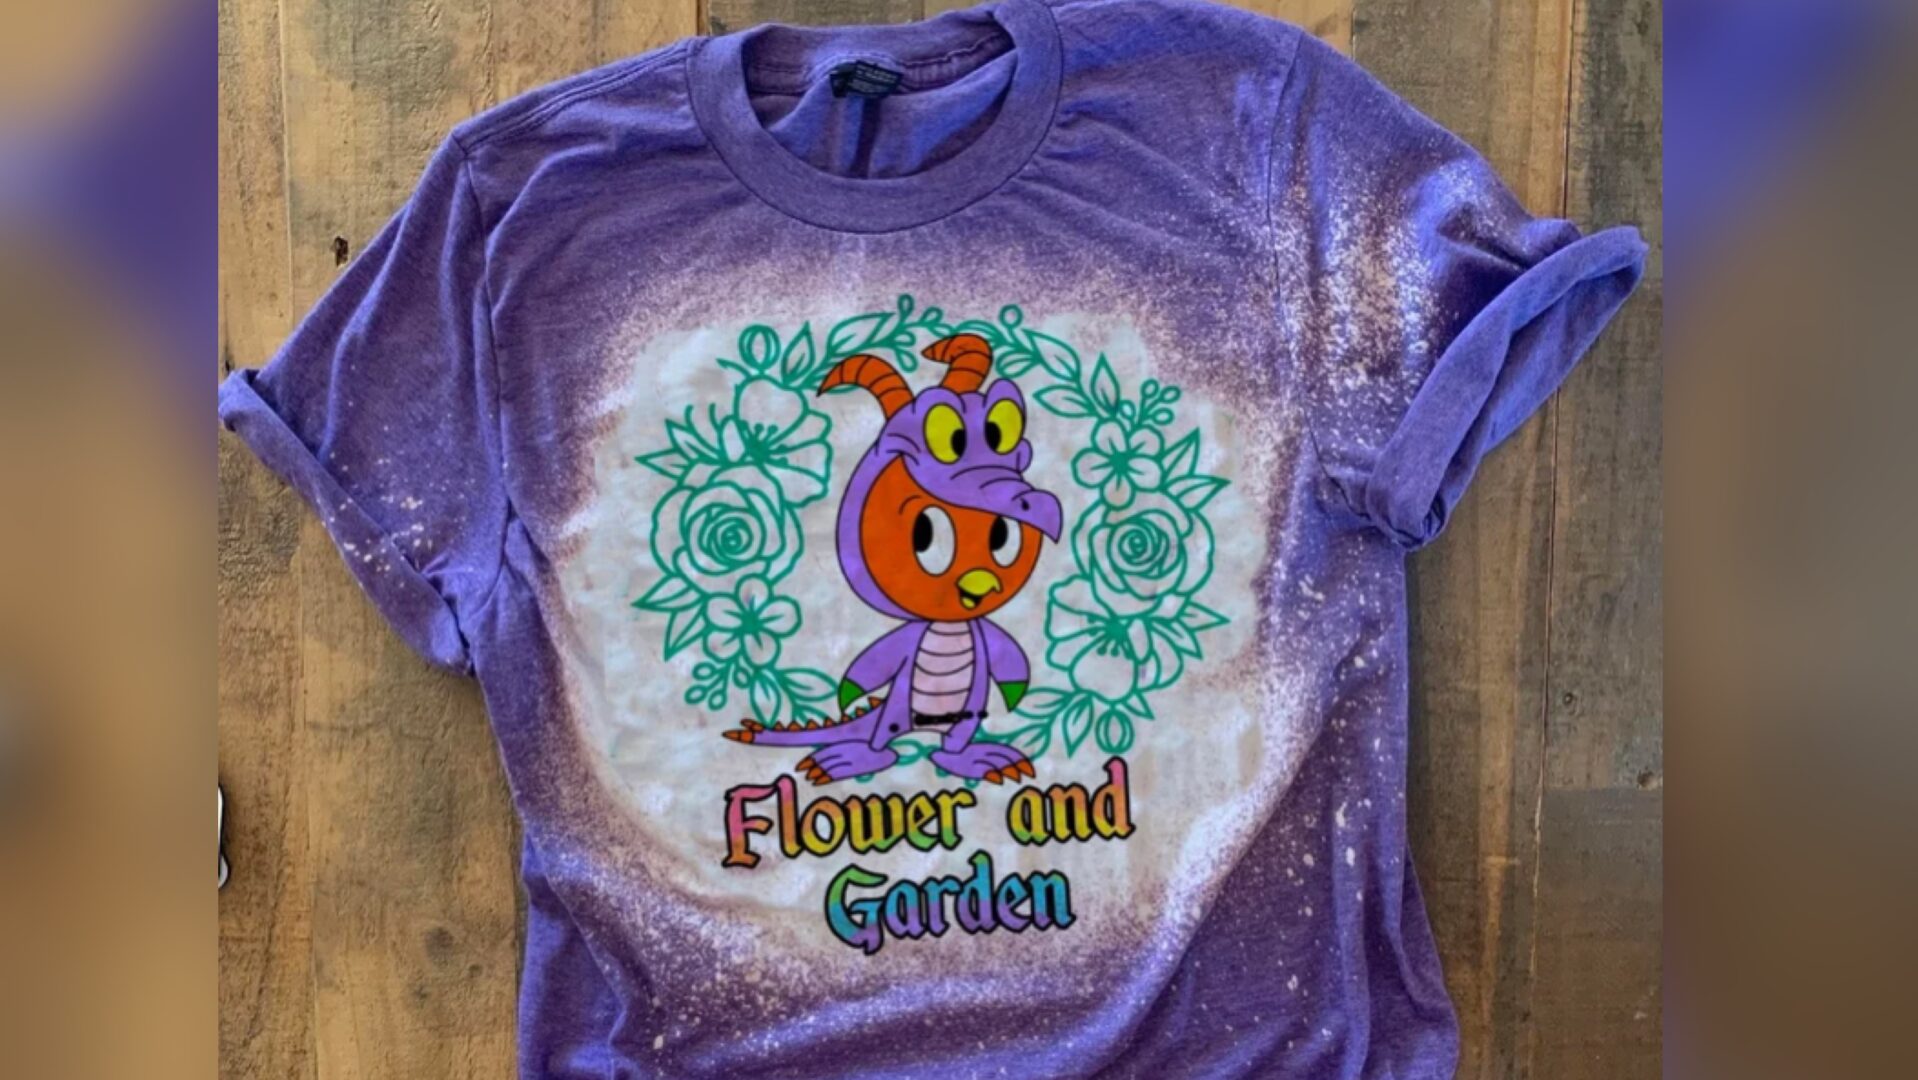 Orange Bird And Figment Flower & Garden Festival Shirts For Your Next Visit To Epcot!